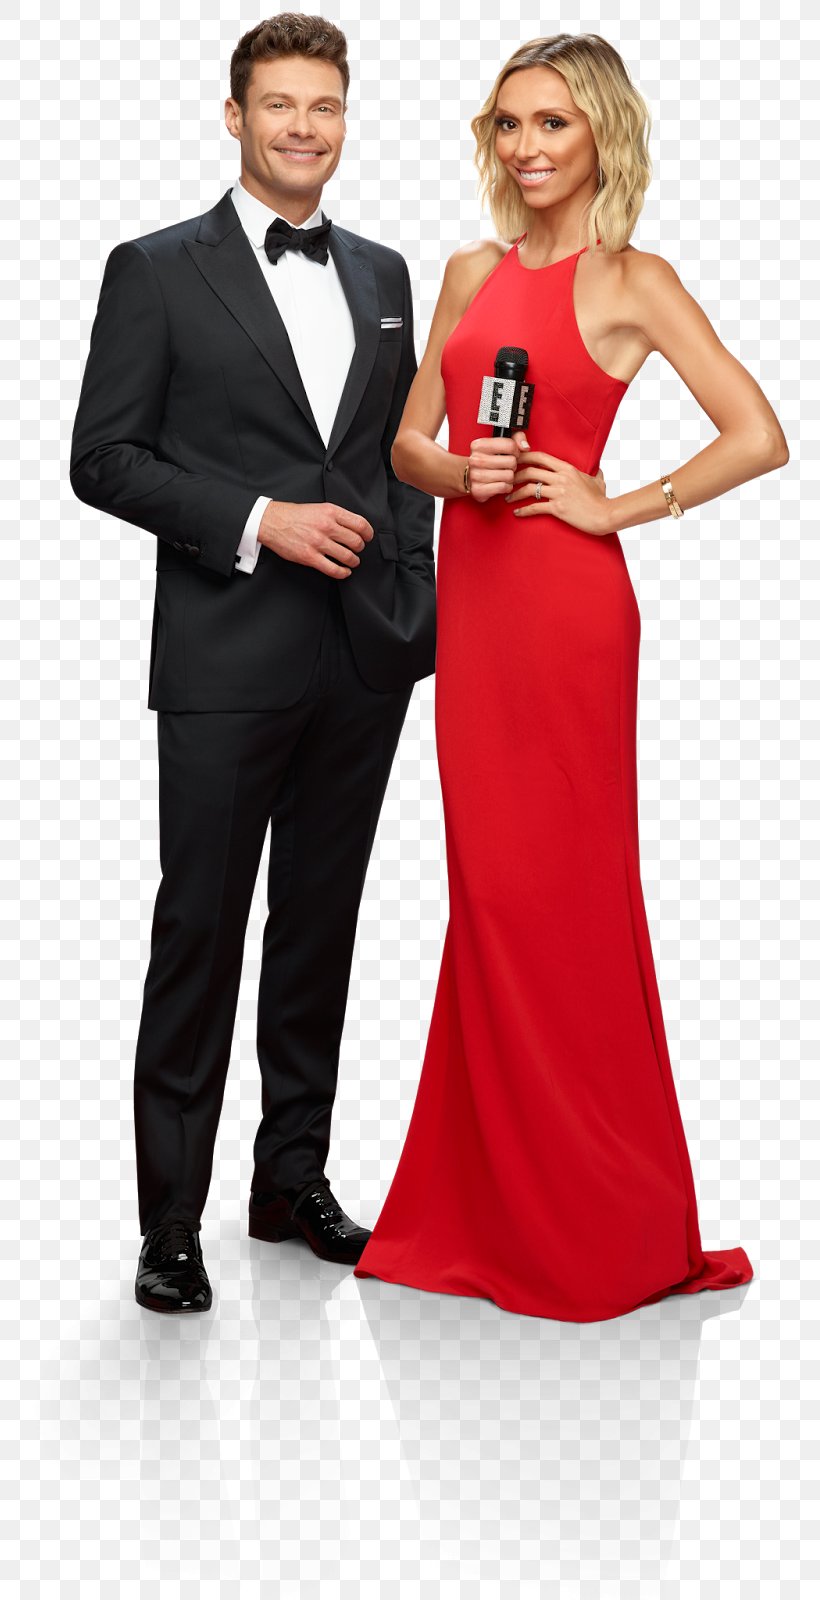 Giuliana Rancic Live From The Red Carpet Academy Awards Pre-show 89th Academy Awards E! News, PNG, 807x1600px, 75th Golden Globe Awards, 89th Academy Awards, 90th Academy Awards, Giuliana Rancic, Academy Awards Download Free